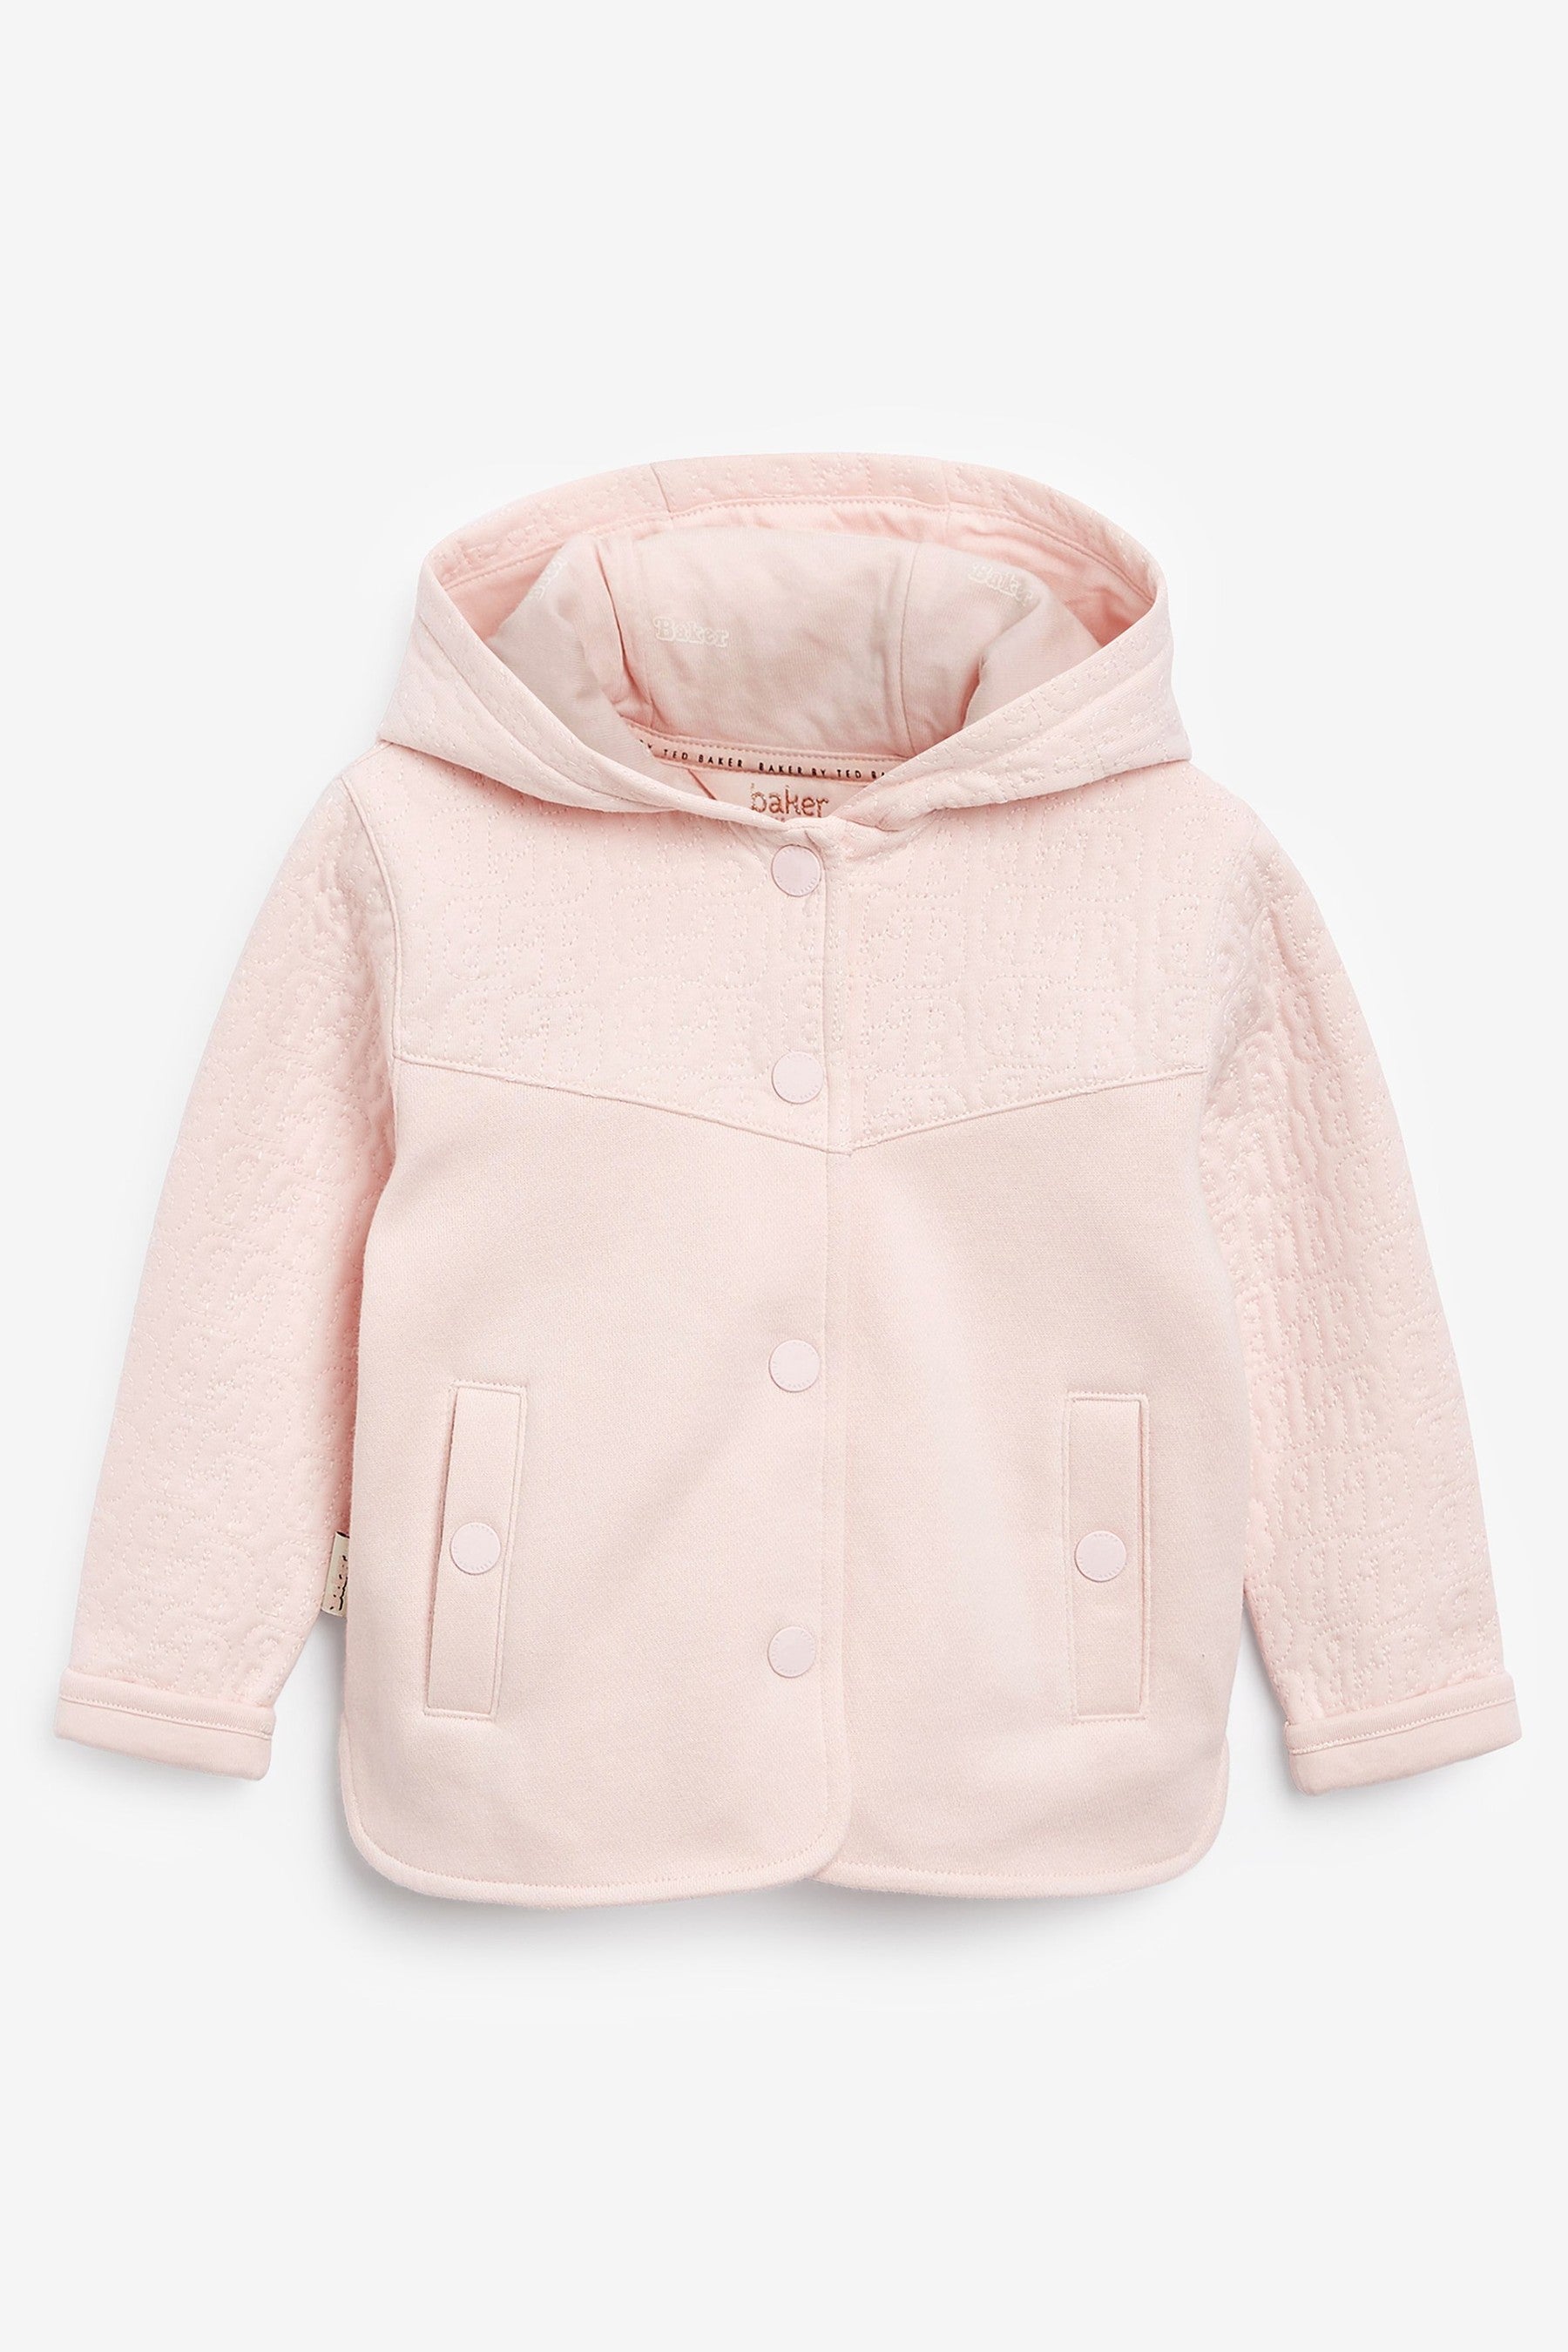 Baker by Ted Baker Pink Quilted Jacket